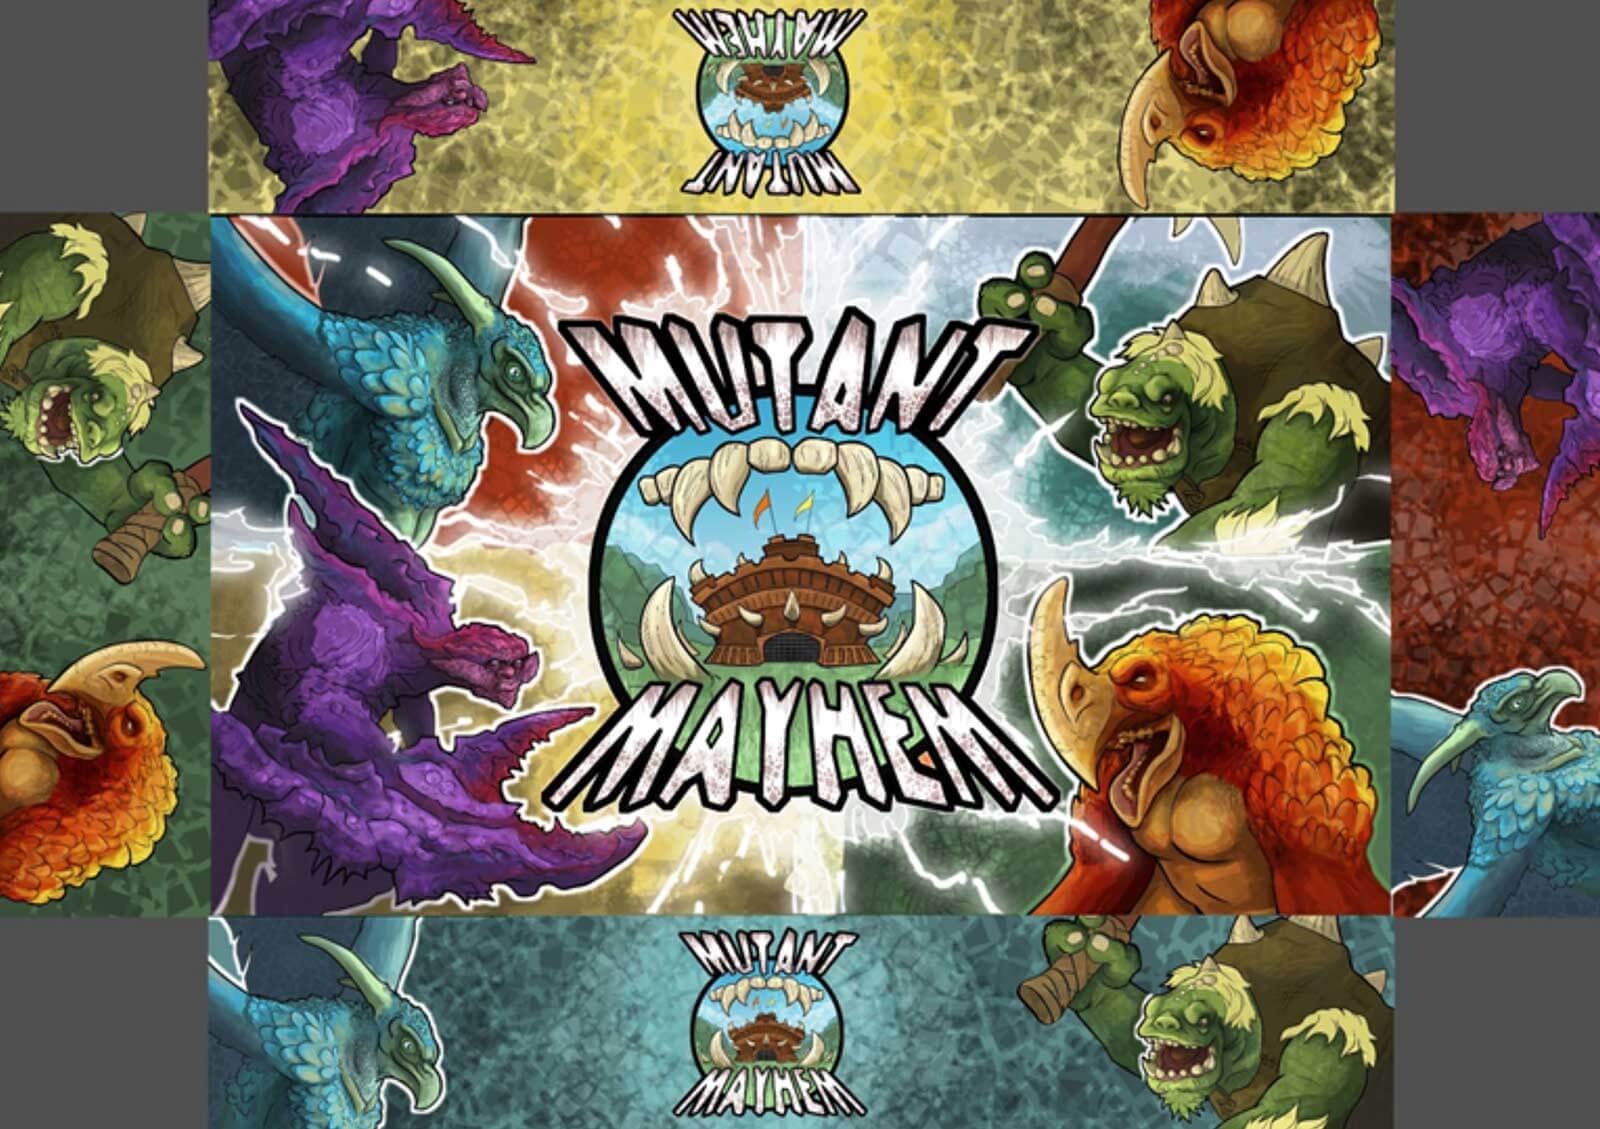 A mockup of the box art and design for a tabletop game named Mutant Mayhem. 